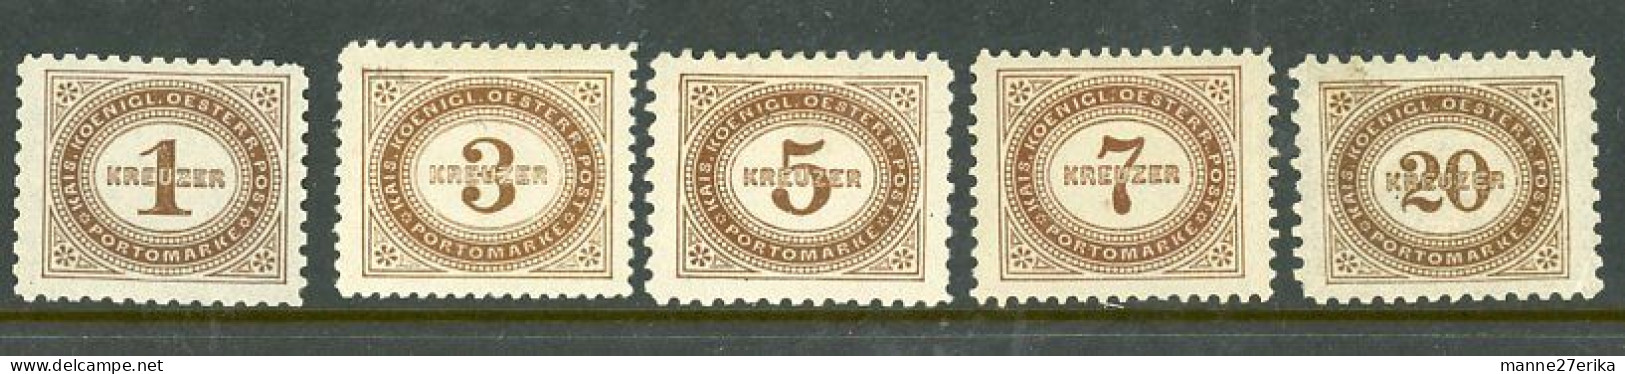 Austria MH 1894 Postage Due - Used Stamps